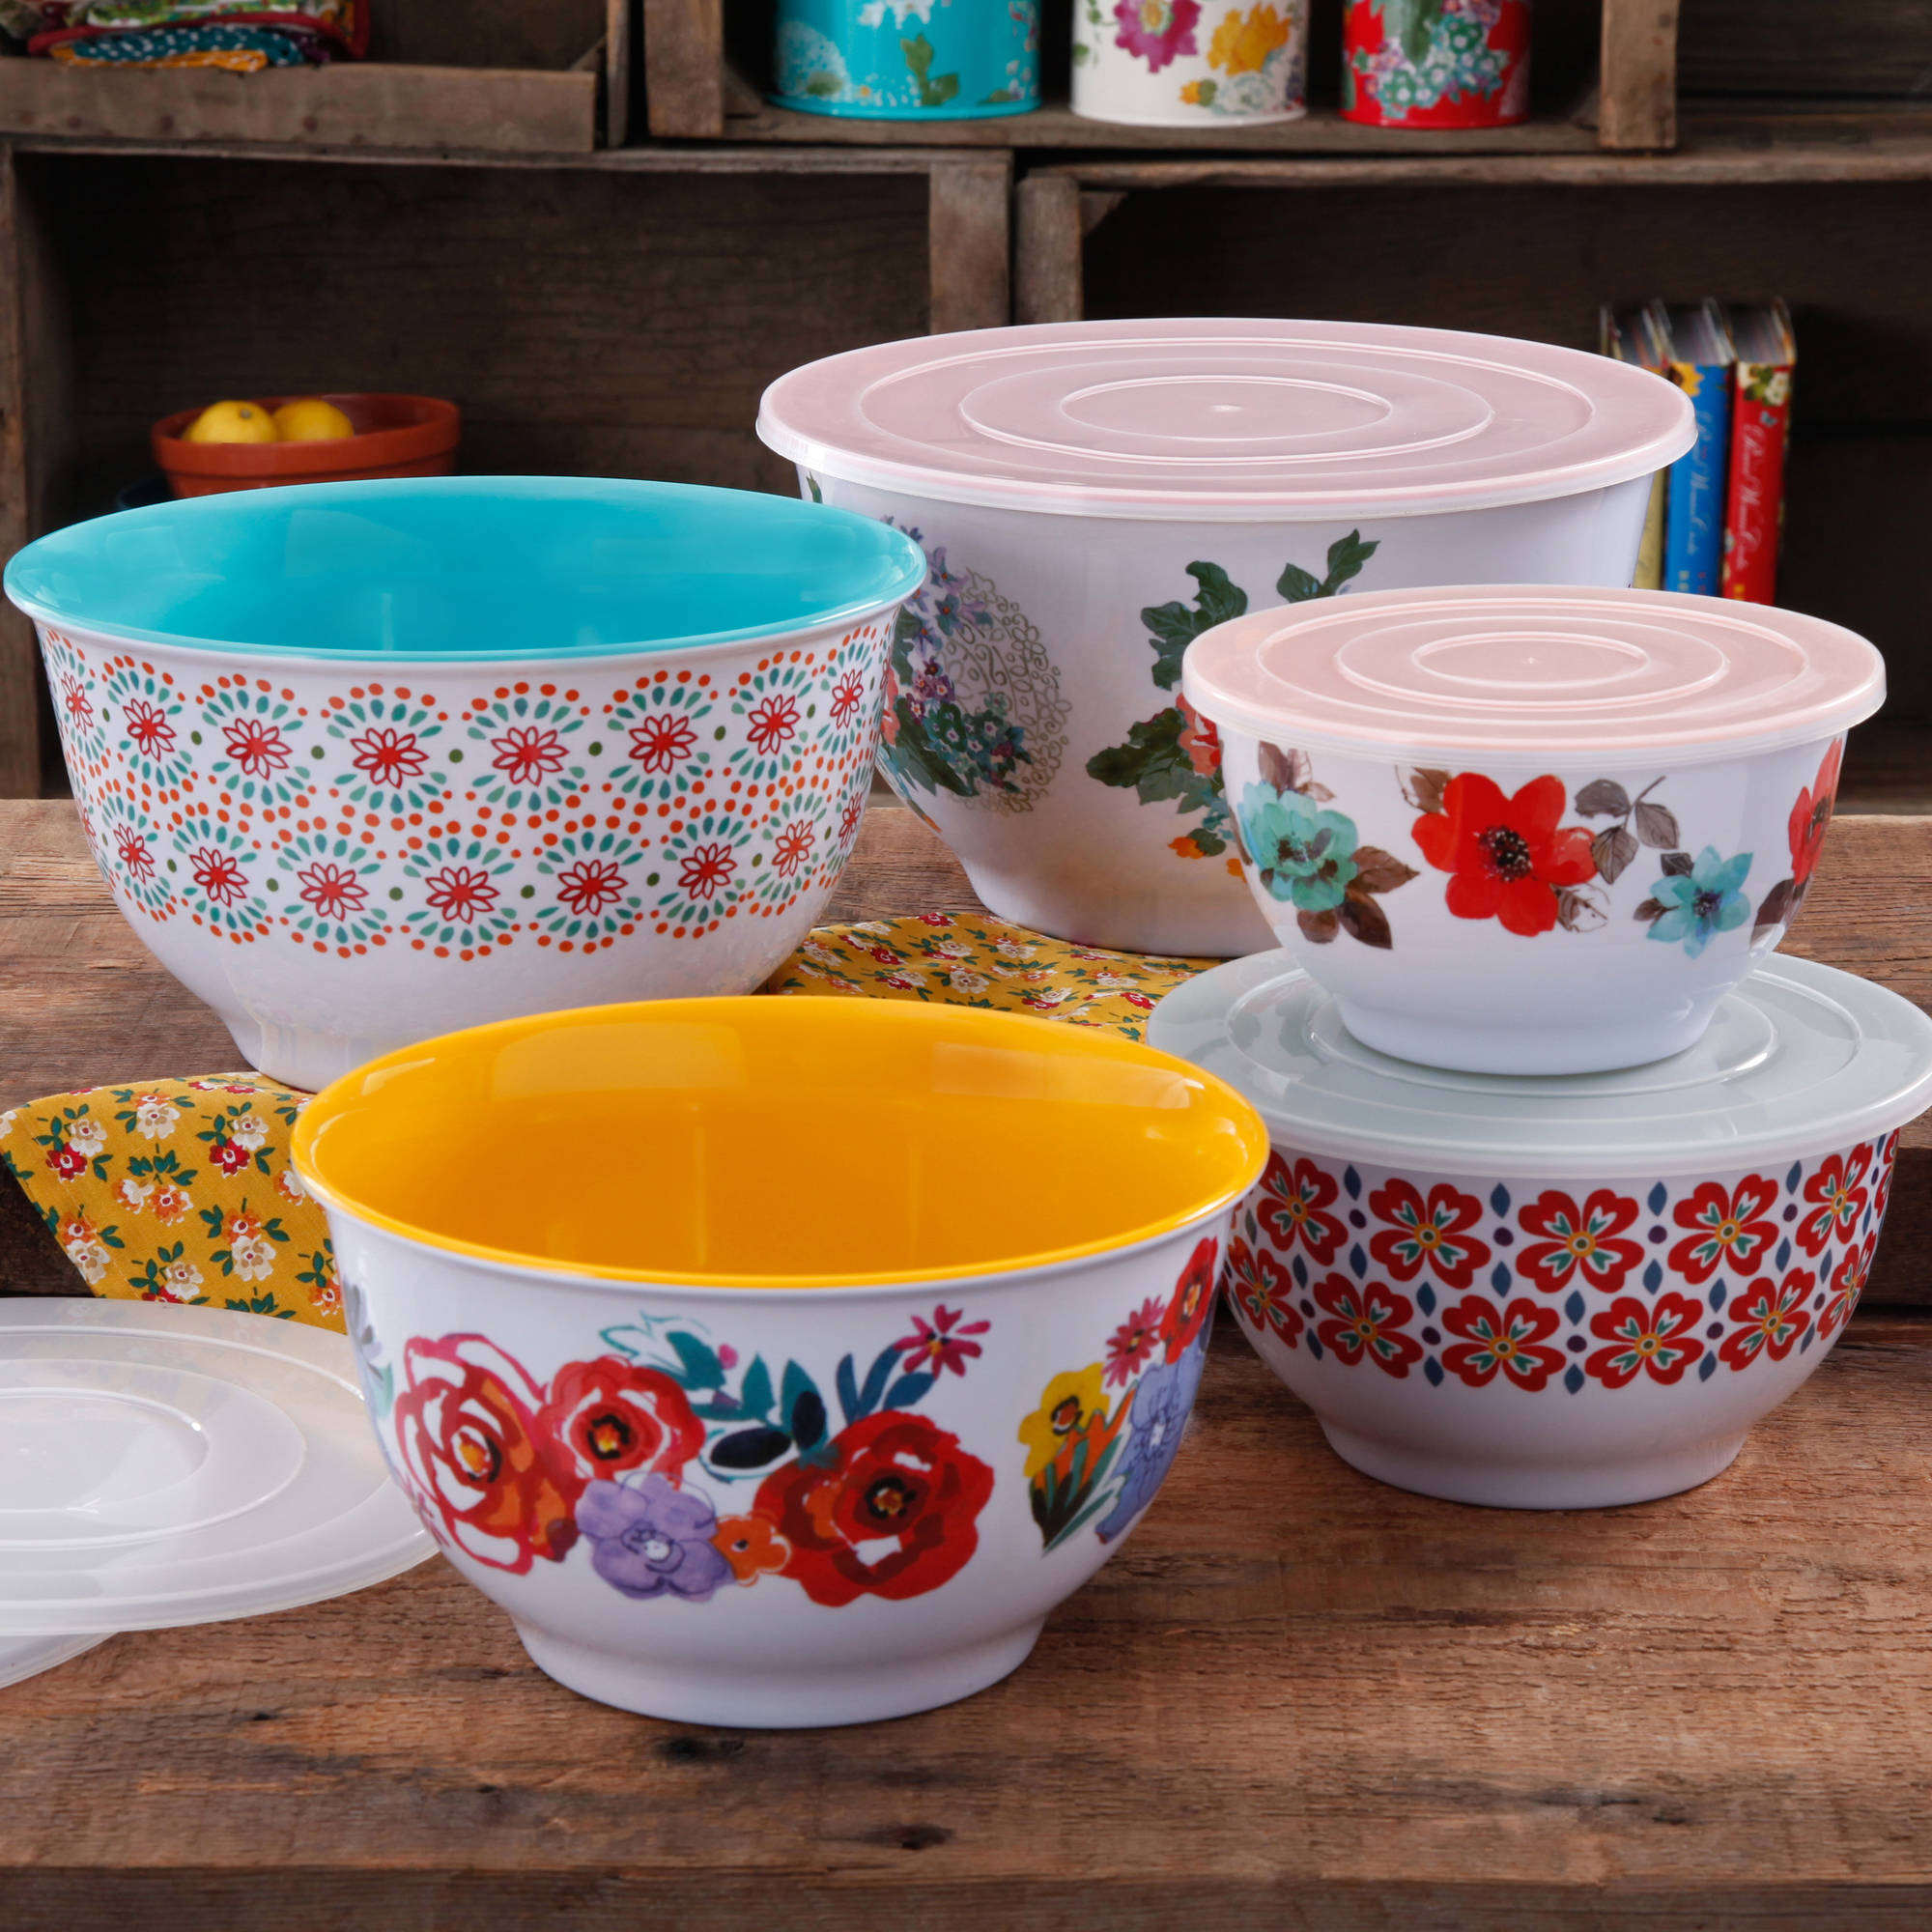 The Pioneer Woman Country Garden Nesting Mixing Bowl Set (10 Piece) Only $25.00!